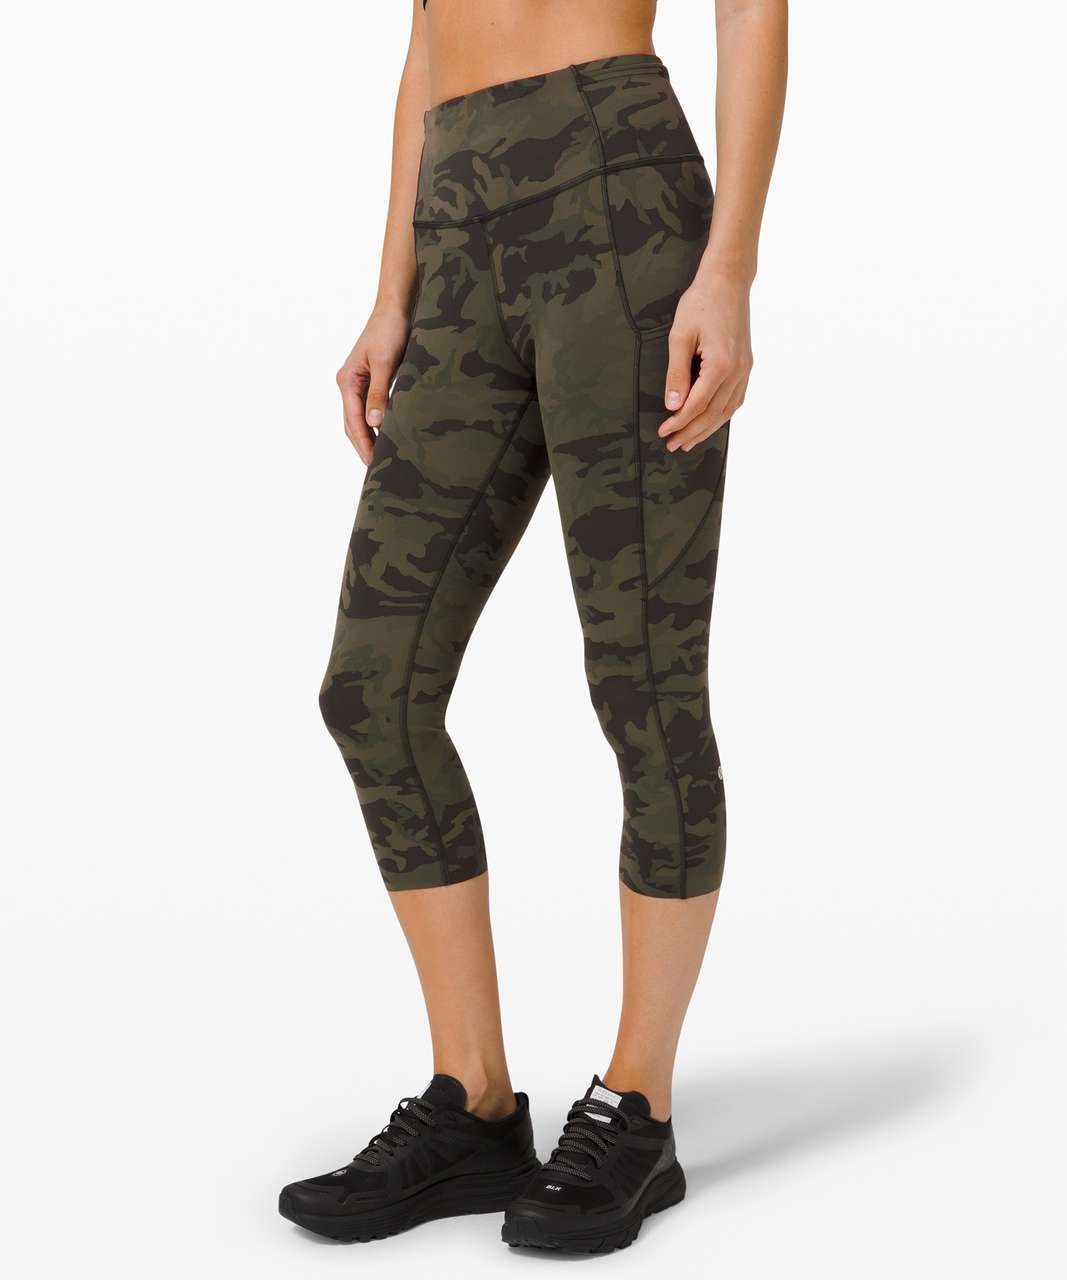 For all the gator green camo haters : r/lululemon